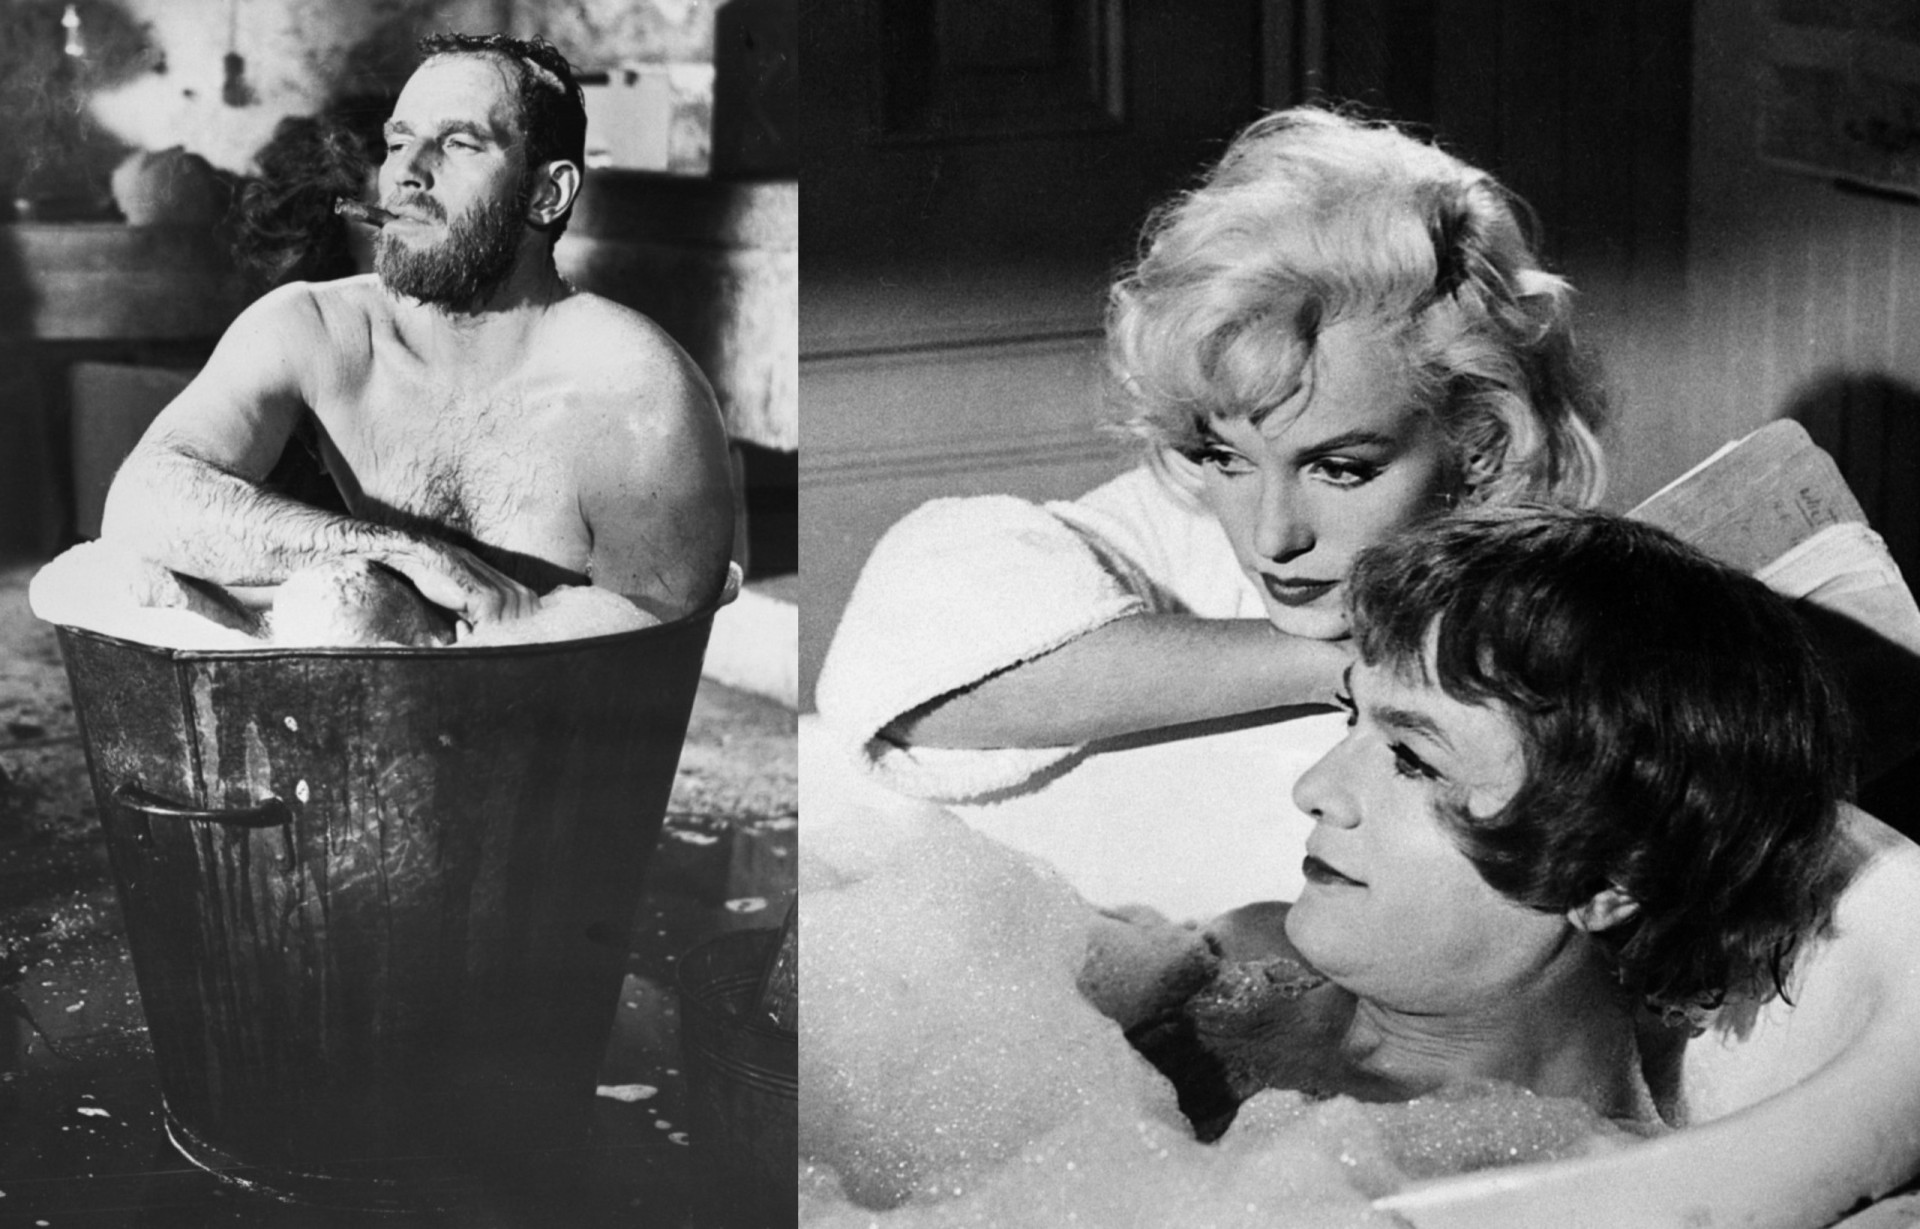 <p>The humble bathtub has proved a useful <a href="https://www.starsinsider.com/movies/472892/behind-the-scenes-stories-about-famous-movie-props" rel="noopener">prop</a> in numerous movies. In fact, some of the most endearing sequences in Hollywood history involve a hot tub or bubble bath, scenes where actors literally take the plunge and deliberately end up in hot water. But who's made the biggest splash in cinema?</p> <p>Click through and soak up this gallery of memorable bathtub moments.</p><p>You may also like:<a href="https://www.starsinsider.com/n/64251?utm_source=msn.com&utm_medium=display&utm_campaign=referral_description&utm_content=546036en-en"> These celebrities have some strange superstitions </a></p>